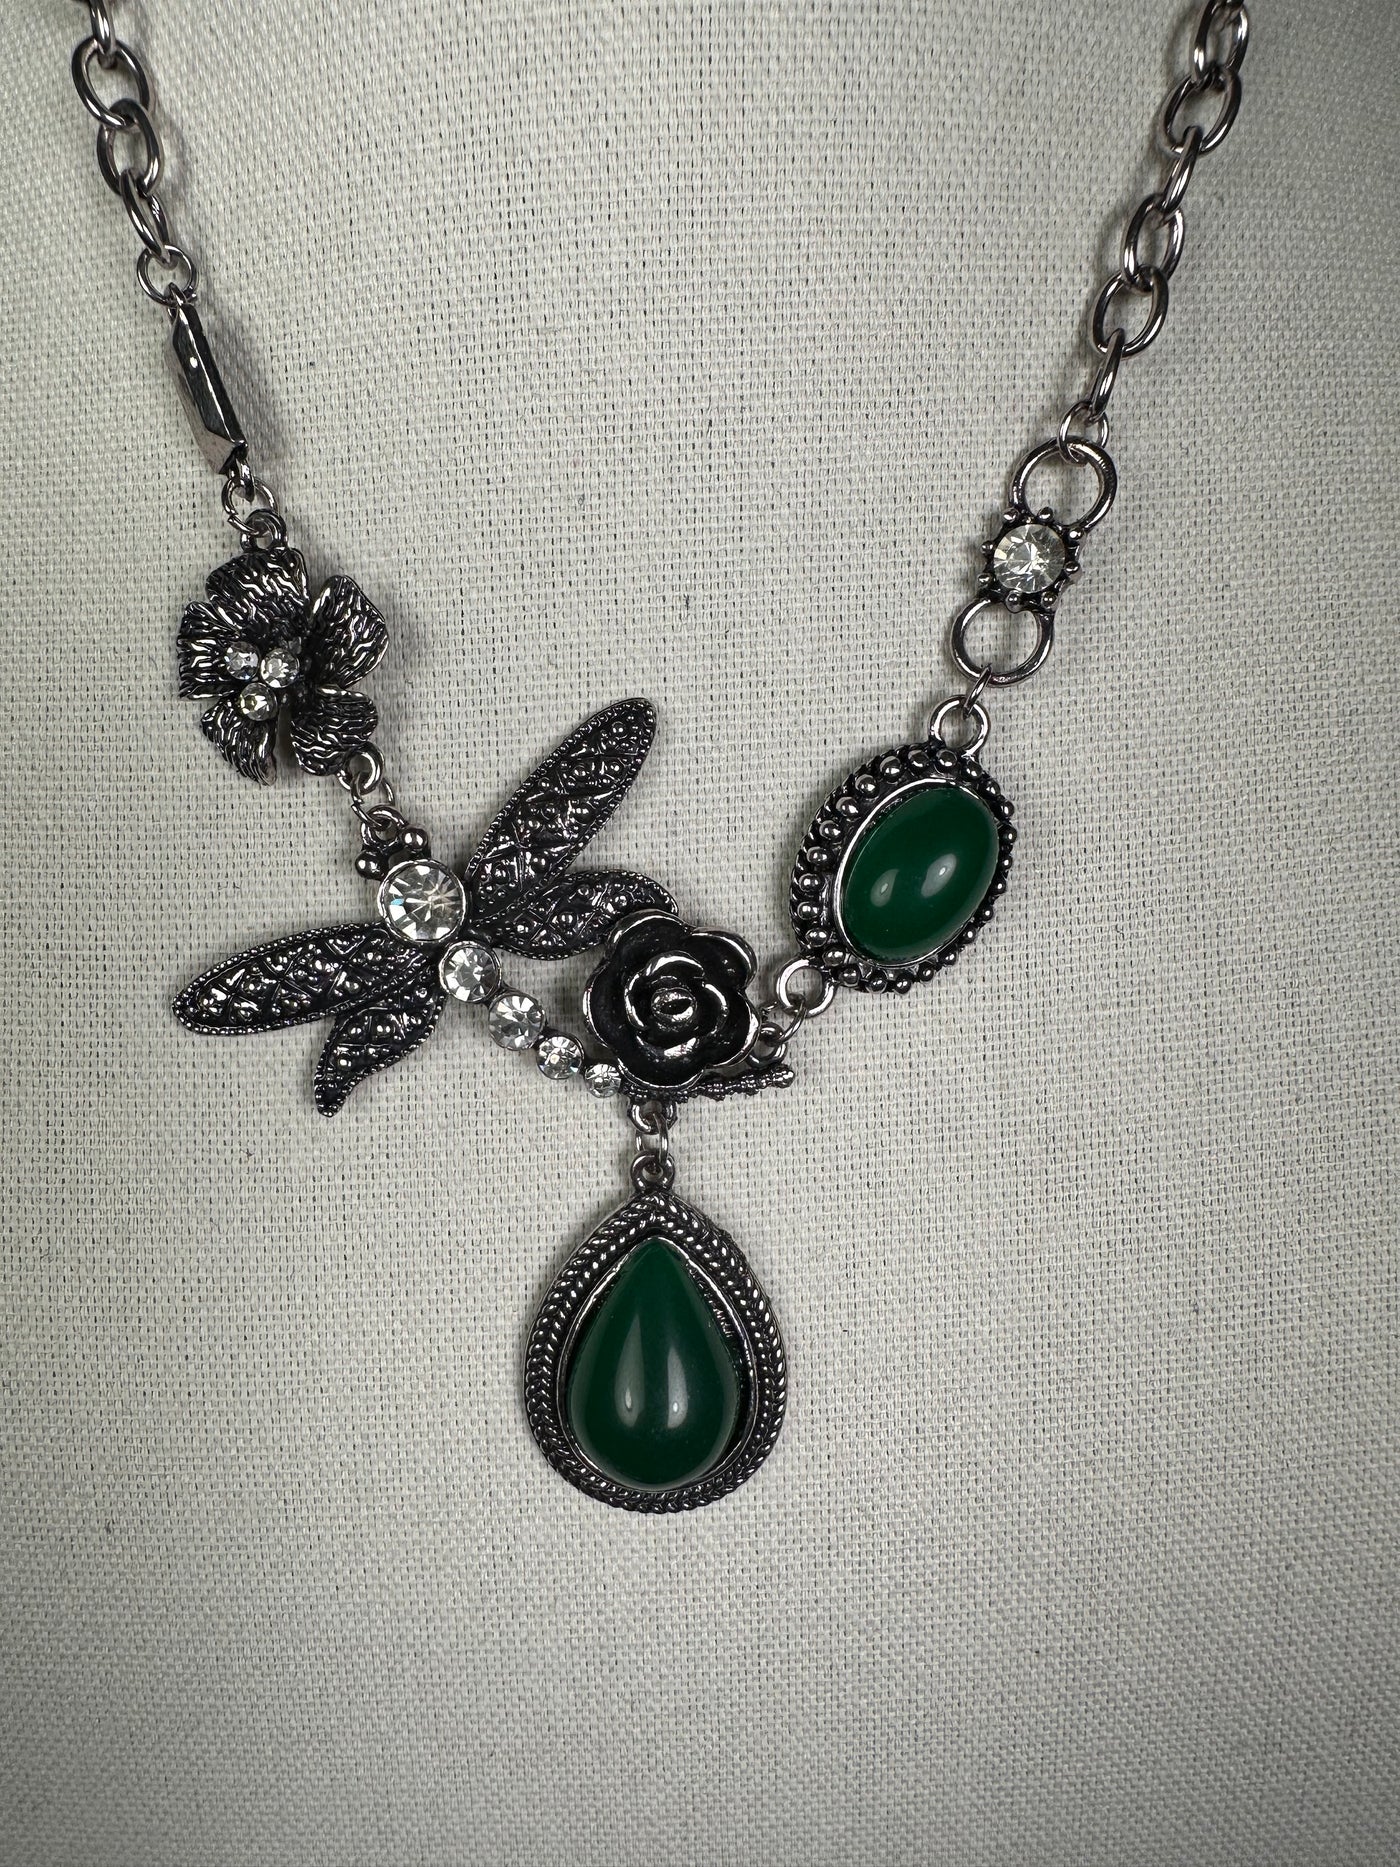 Silver Tone Green Agate Howlite Necklace Featuring Dragonfly